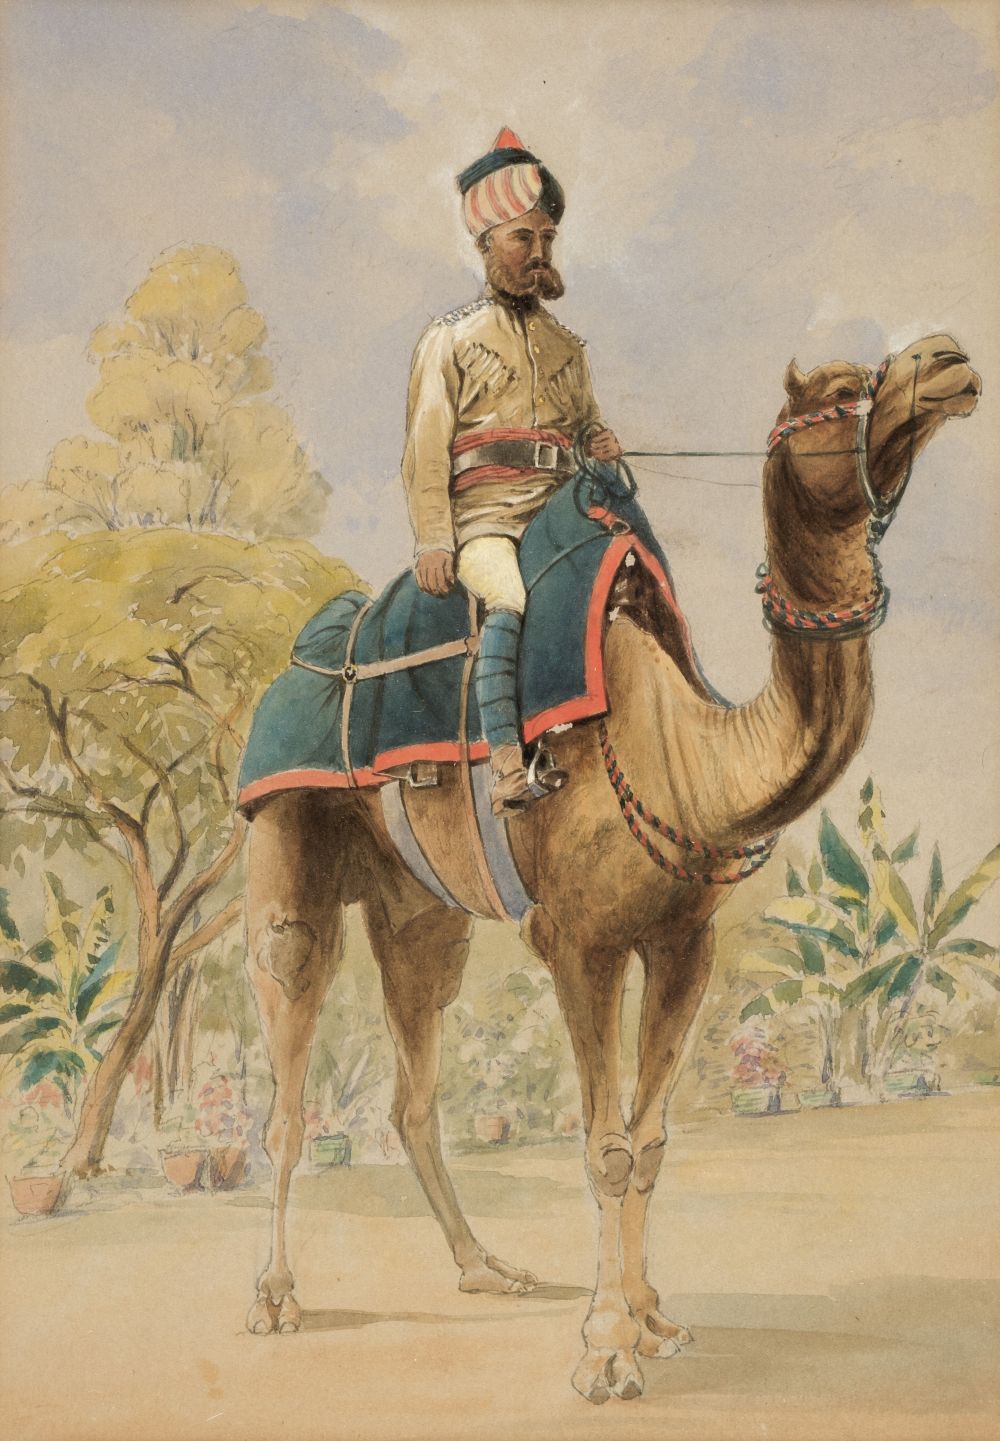 India. A collection of British India military costume, circa 1830s-50s